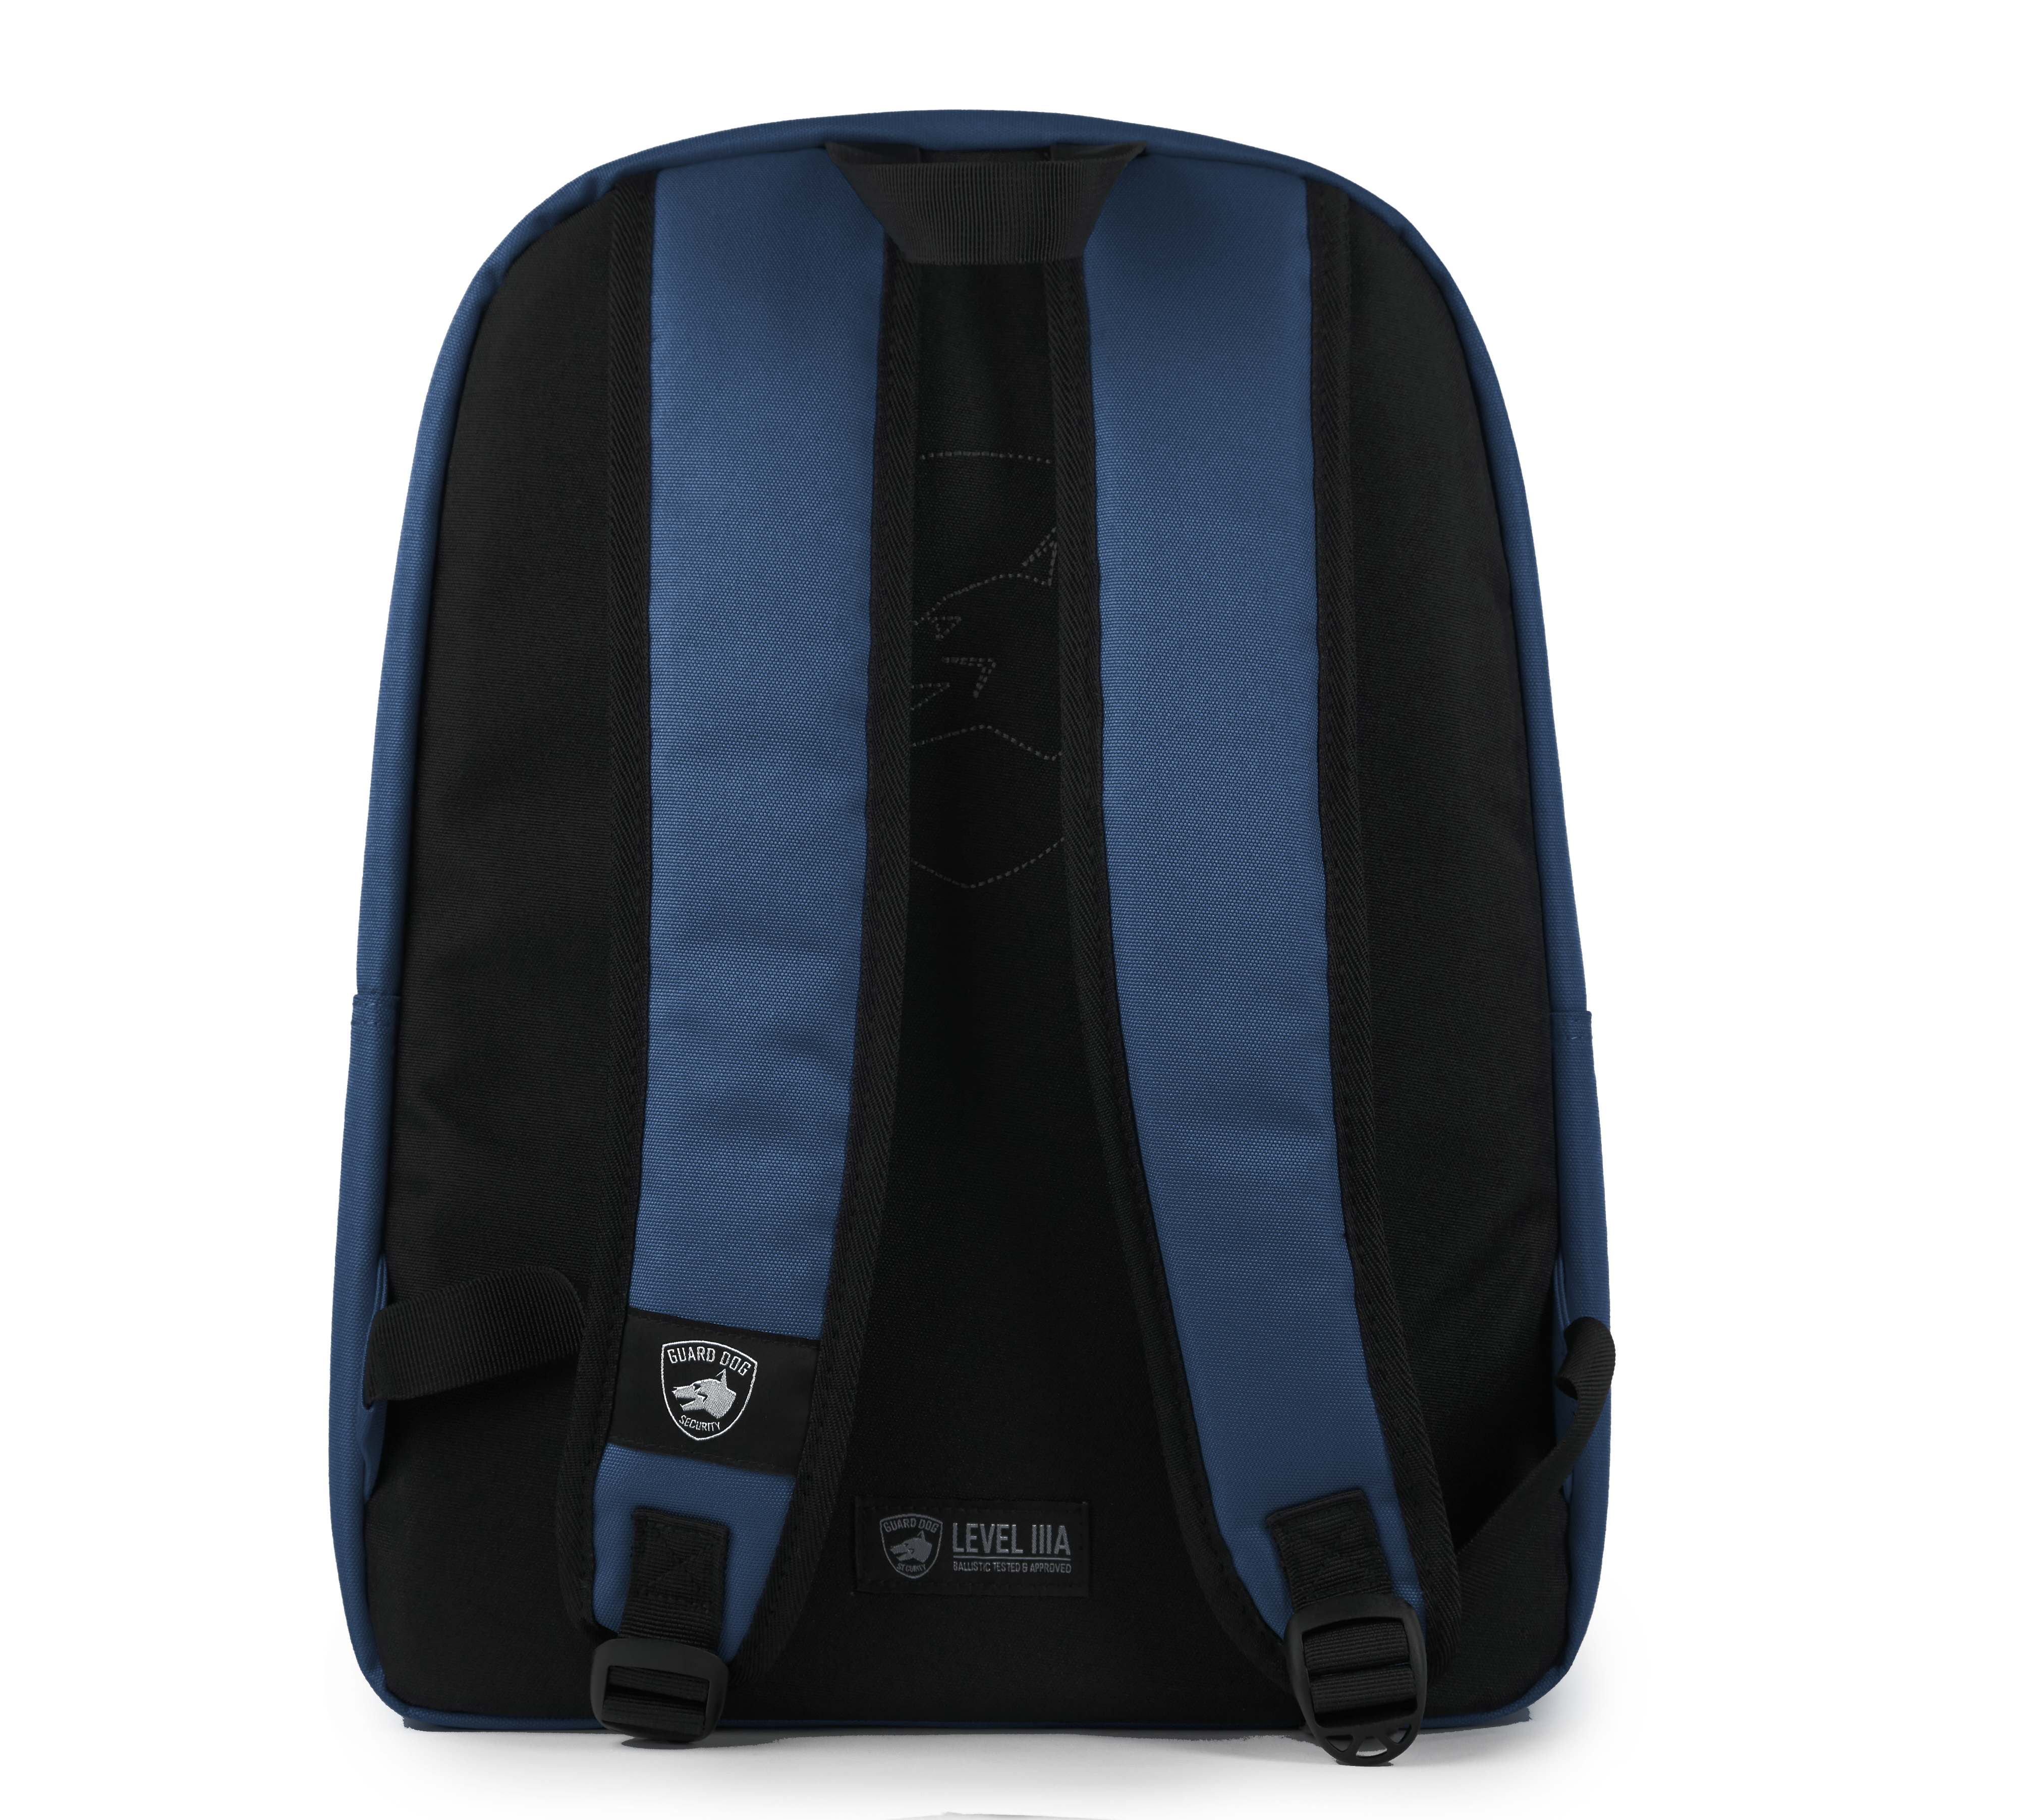 Proshield Scout - Bulletproof Backpack, Level IIIA, Youth Edition (Navy Blue)